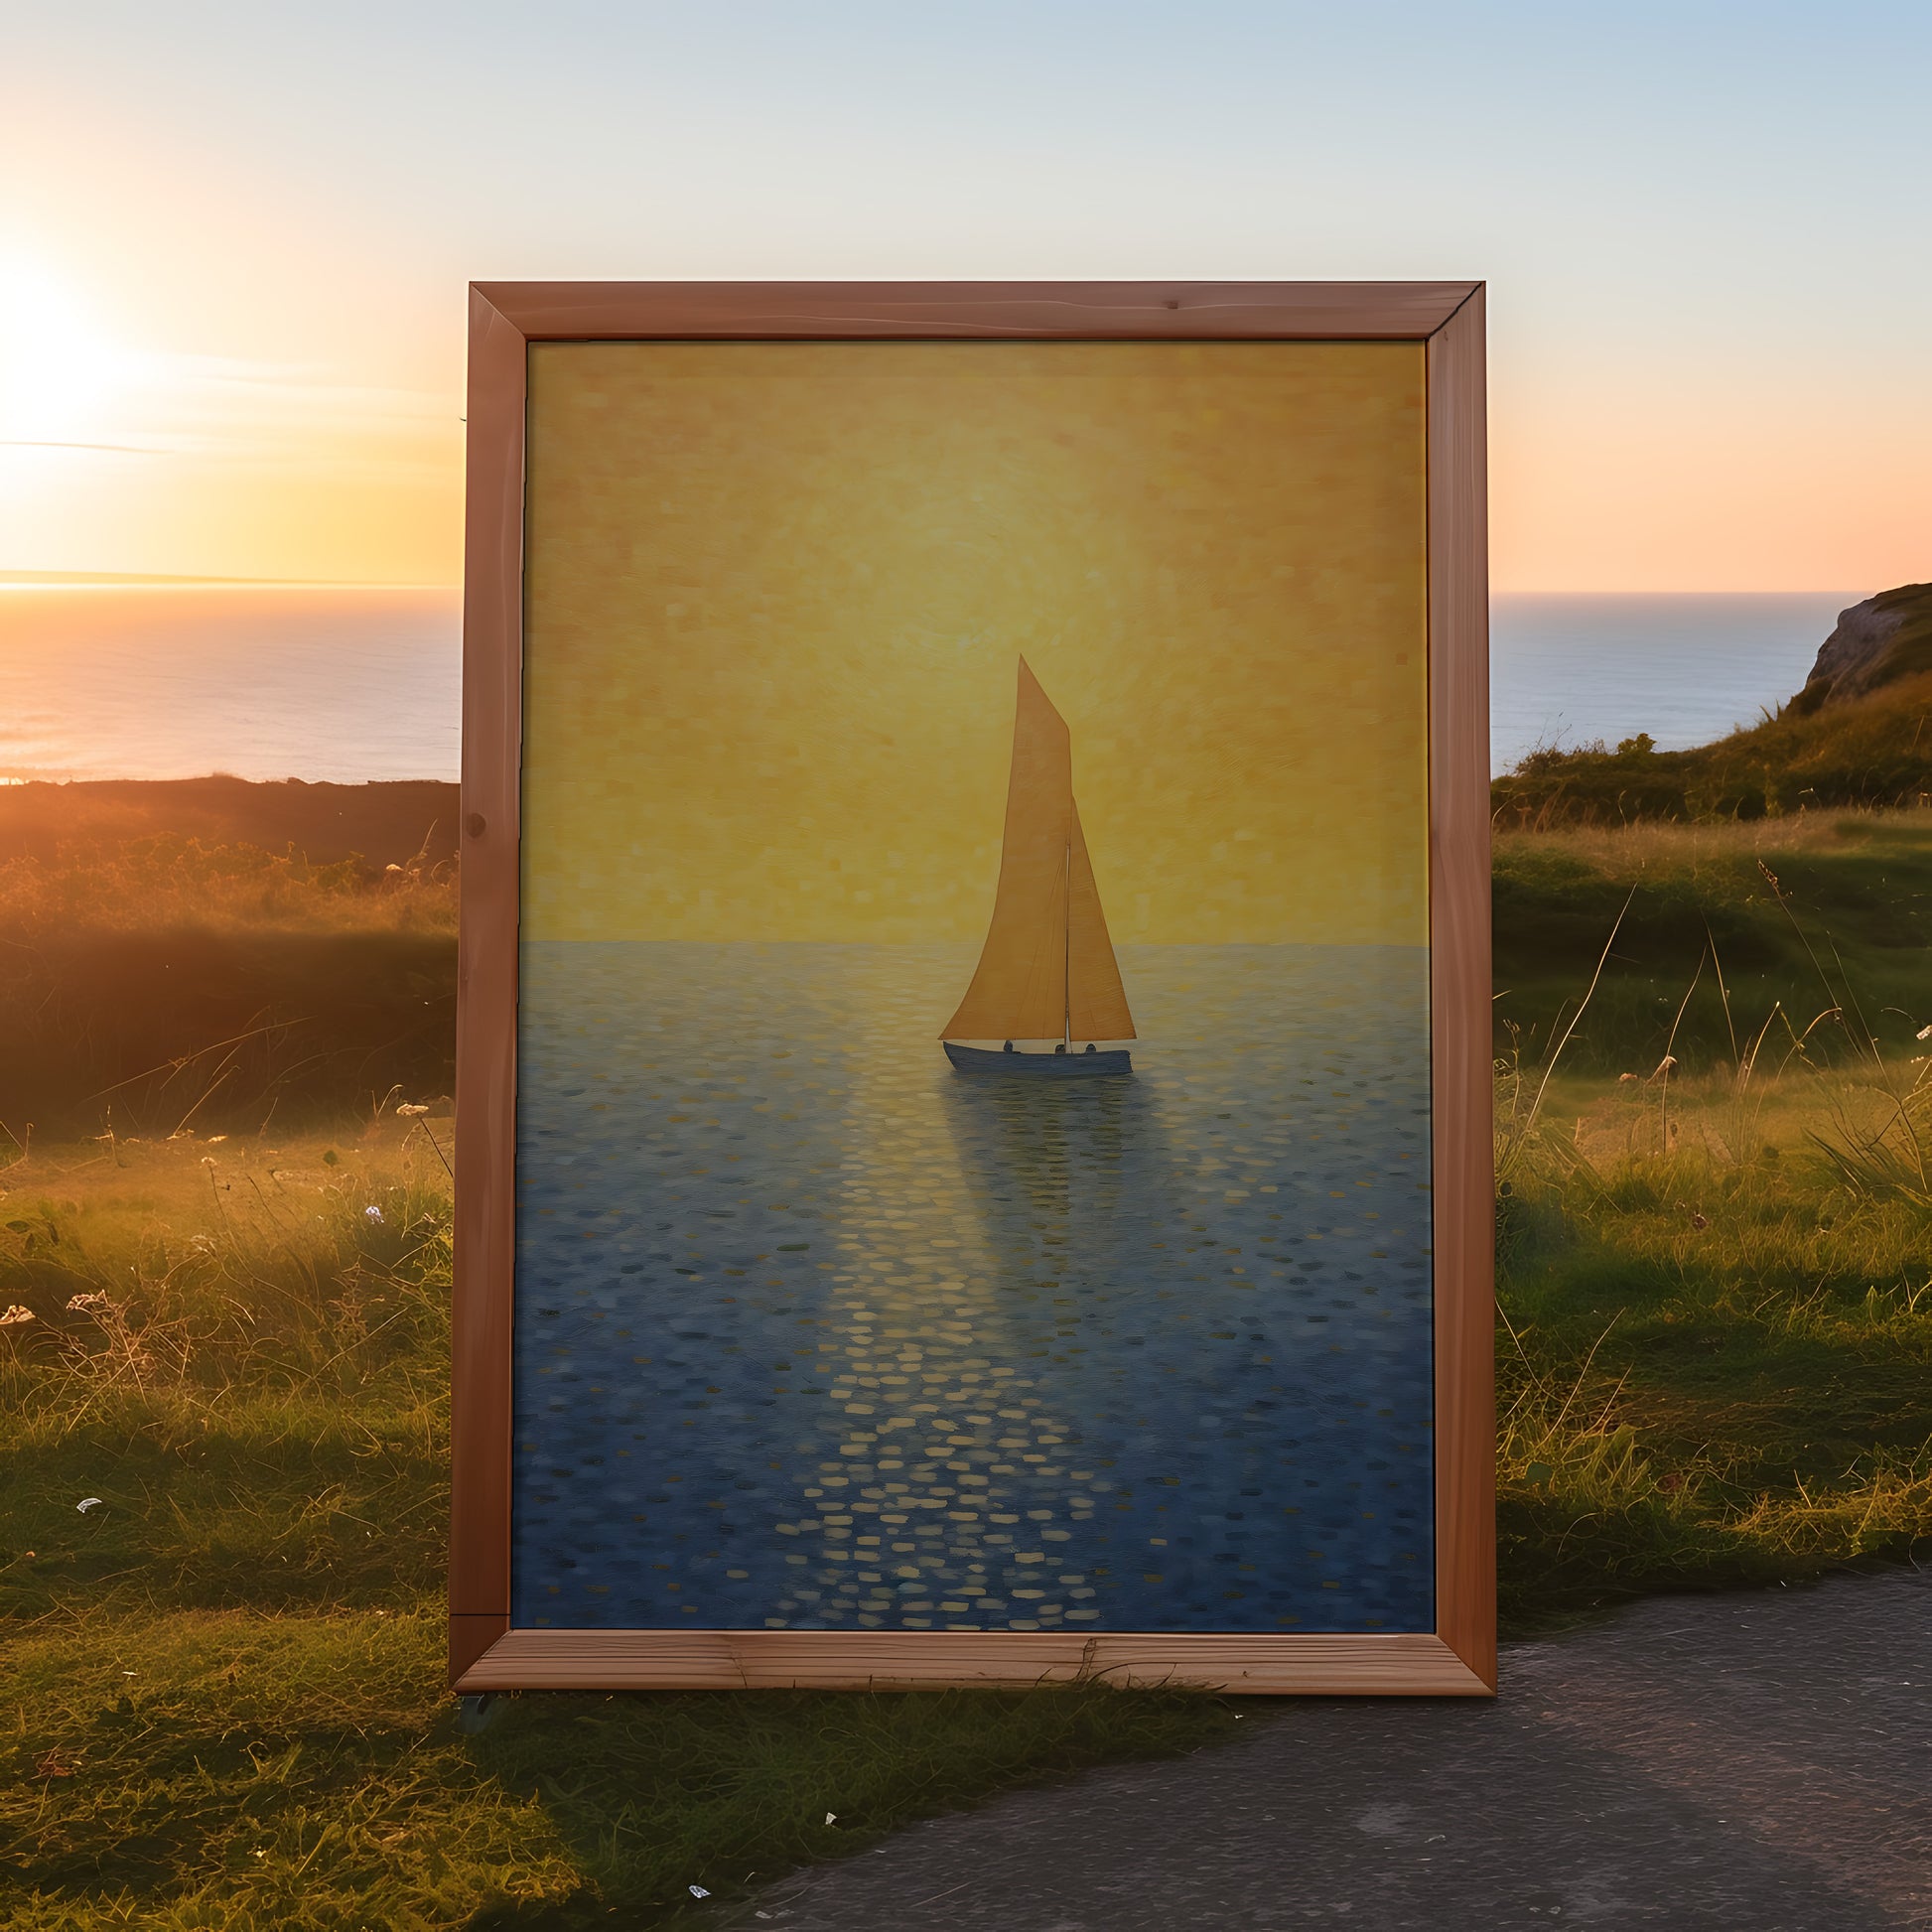 A painting of a sailboat at sunset displayed in a frame standing outdoors.